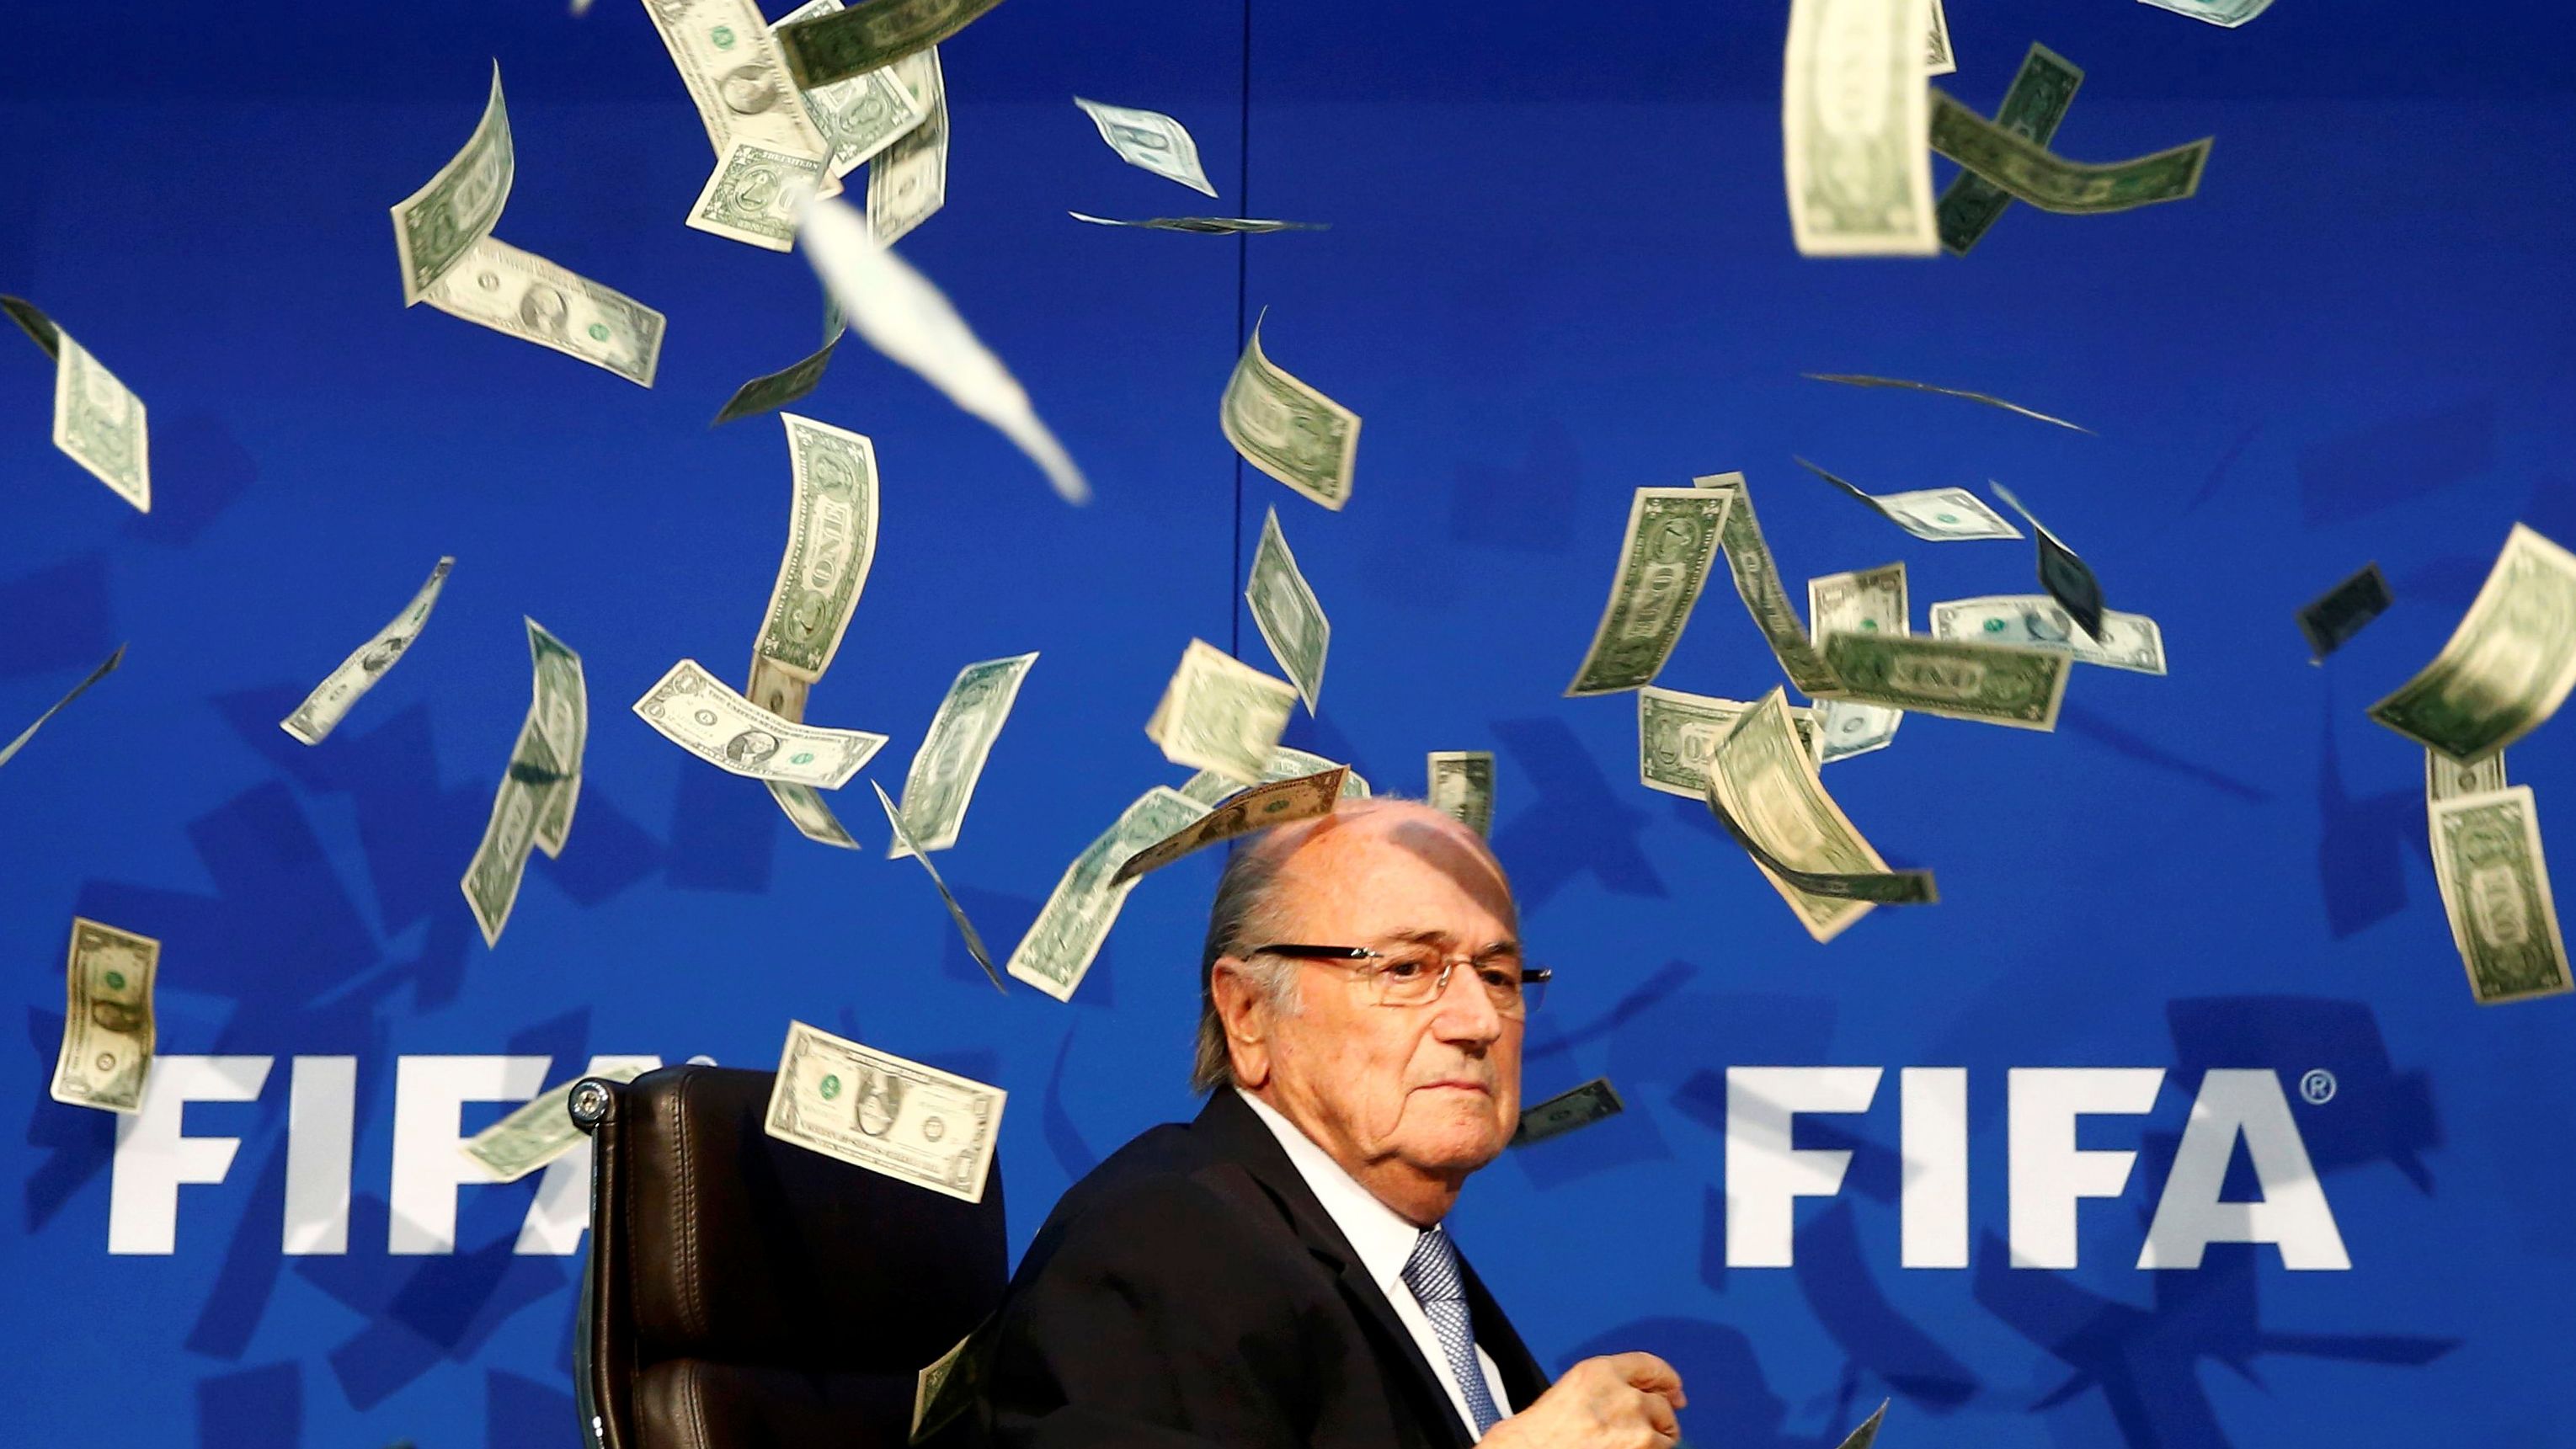 FIFA President Sepp Blatter is showered by dollar bills during a news conference in Zurich, Switzerland, in July 2015. The money was thrown at Blatter by British comedian Simon Brodkin, who was then ushered away from the stage. Blatter had led soccer's governing body since 1998, but he decided to stand down as FIFA battled corruption scandals.